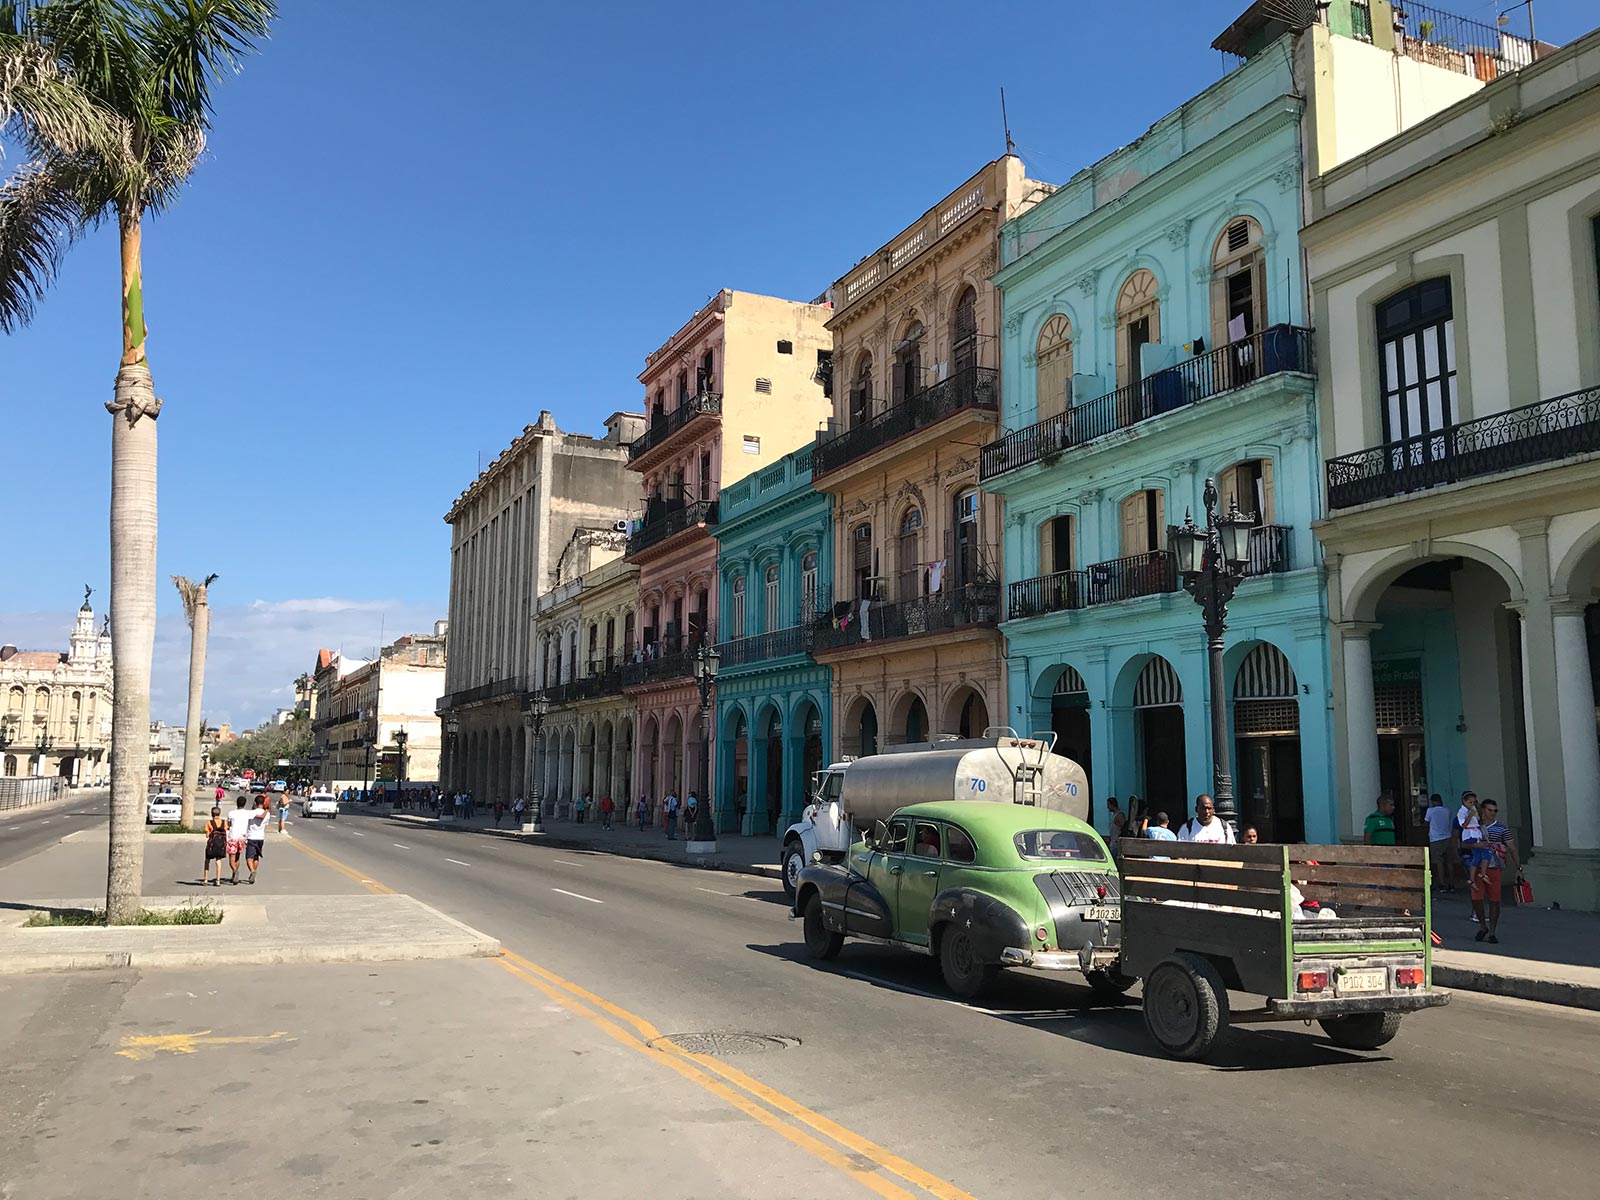 Vintage cars and buildings in Havana, Cuba. Cigars, cars & cocktails in Cuba